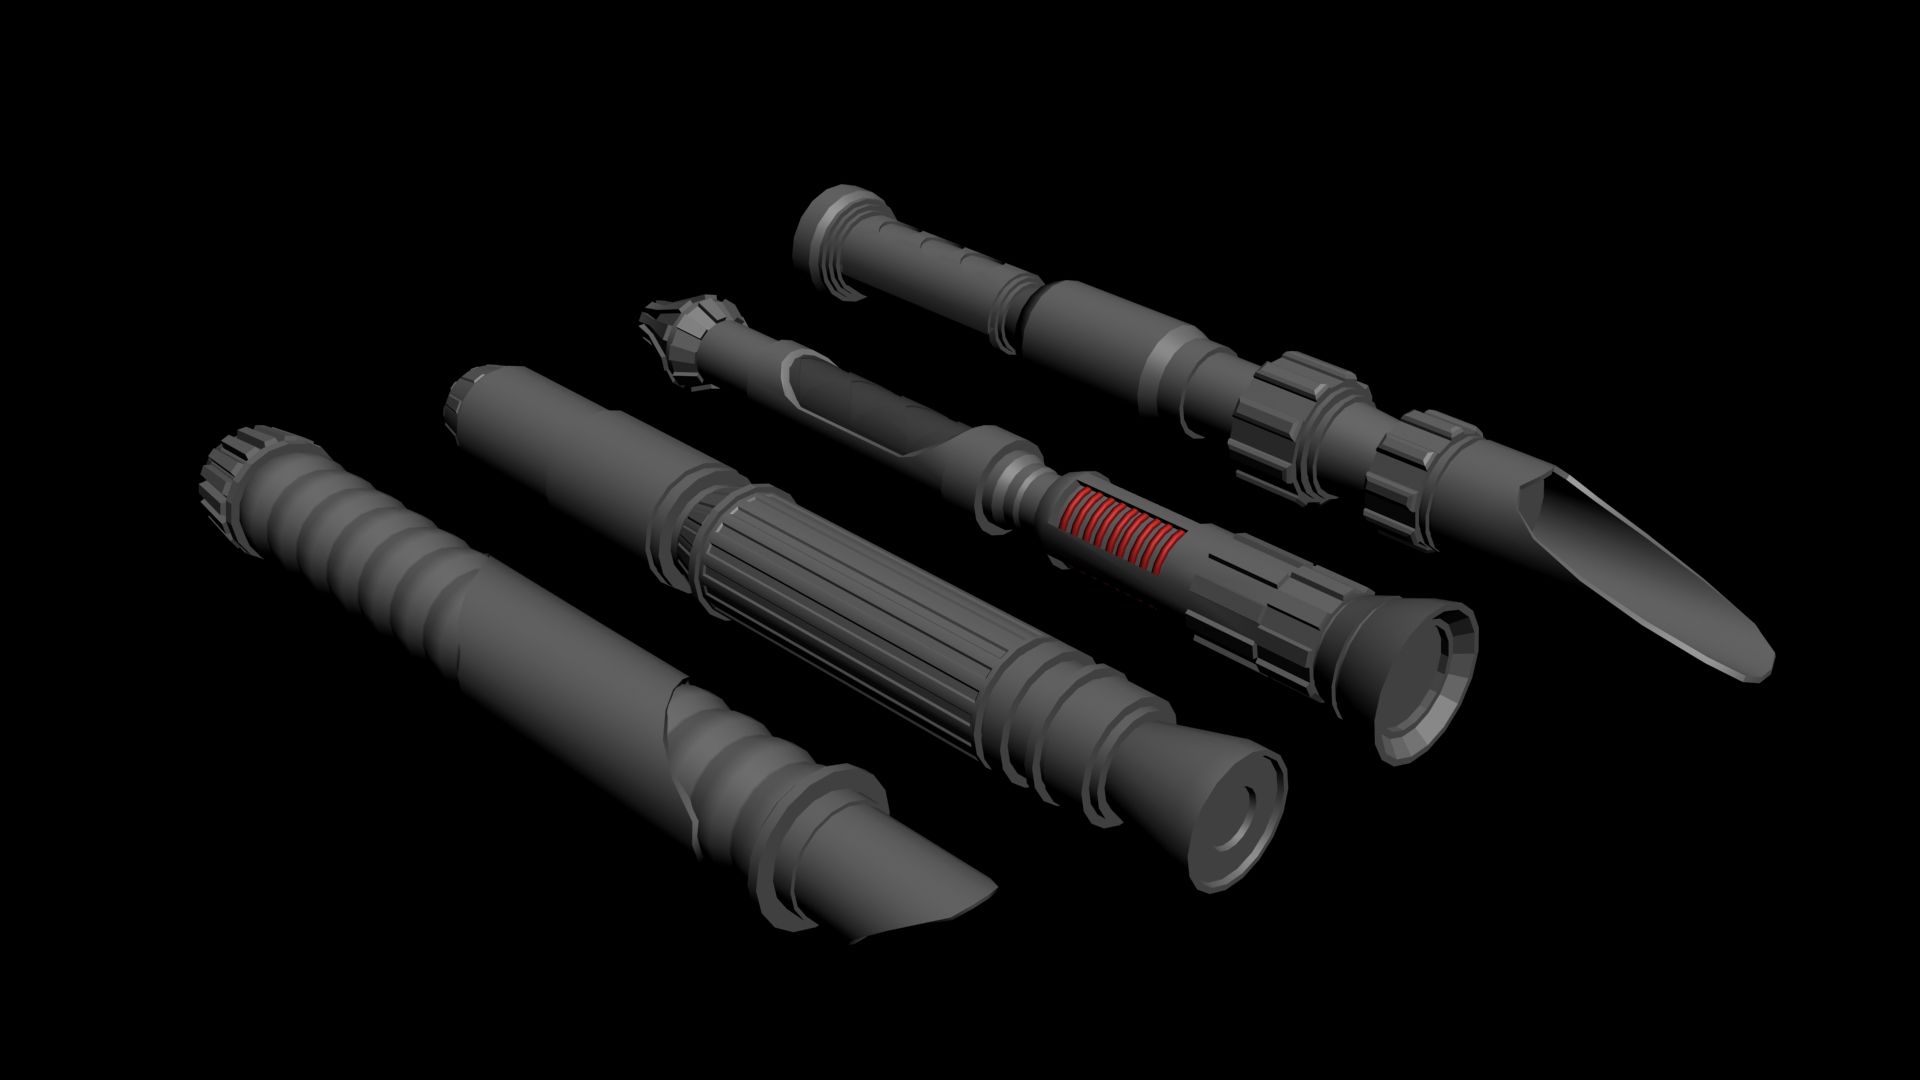 Lightsaber hilts WIP image mod for Star Wars: Knights of the Old Republic